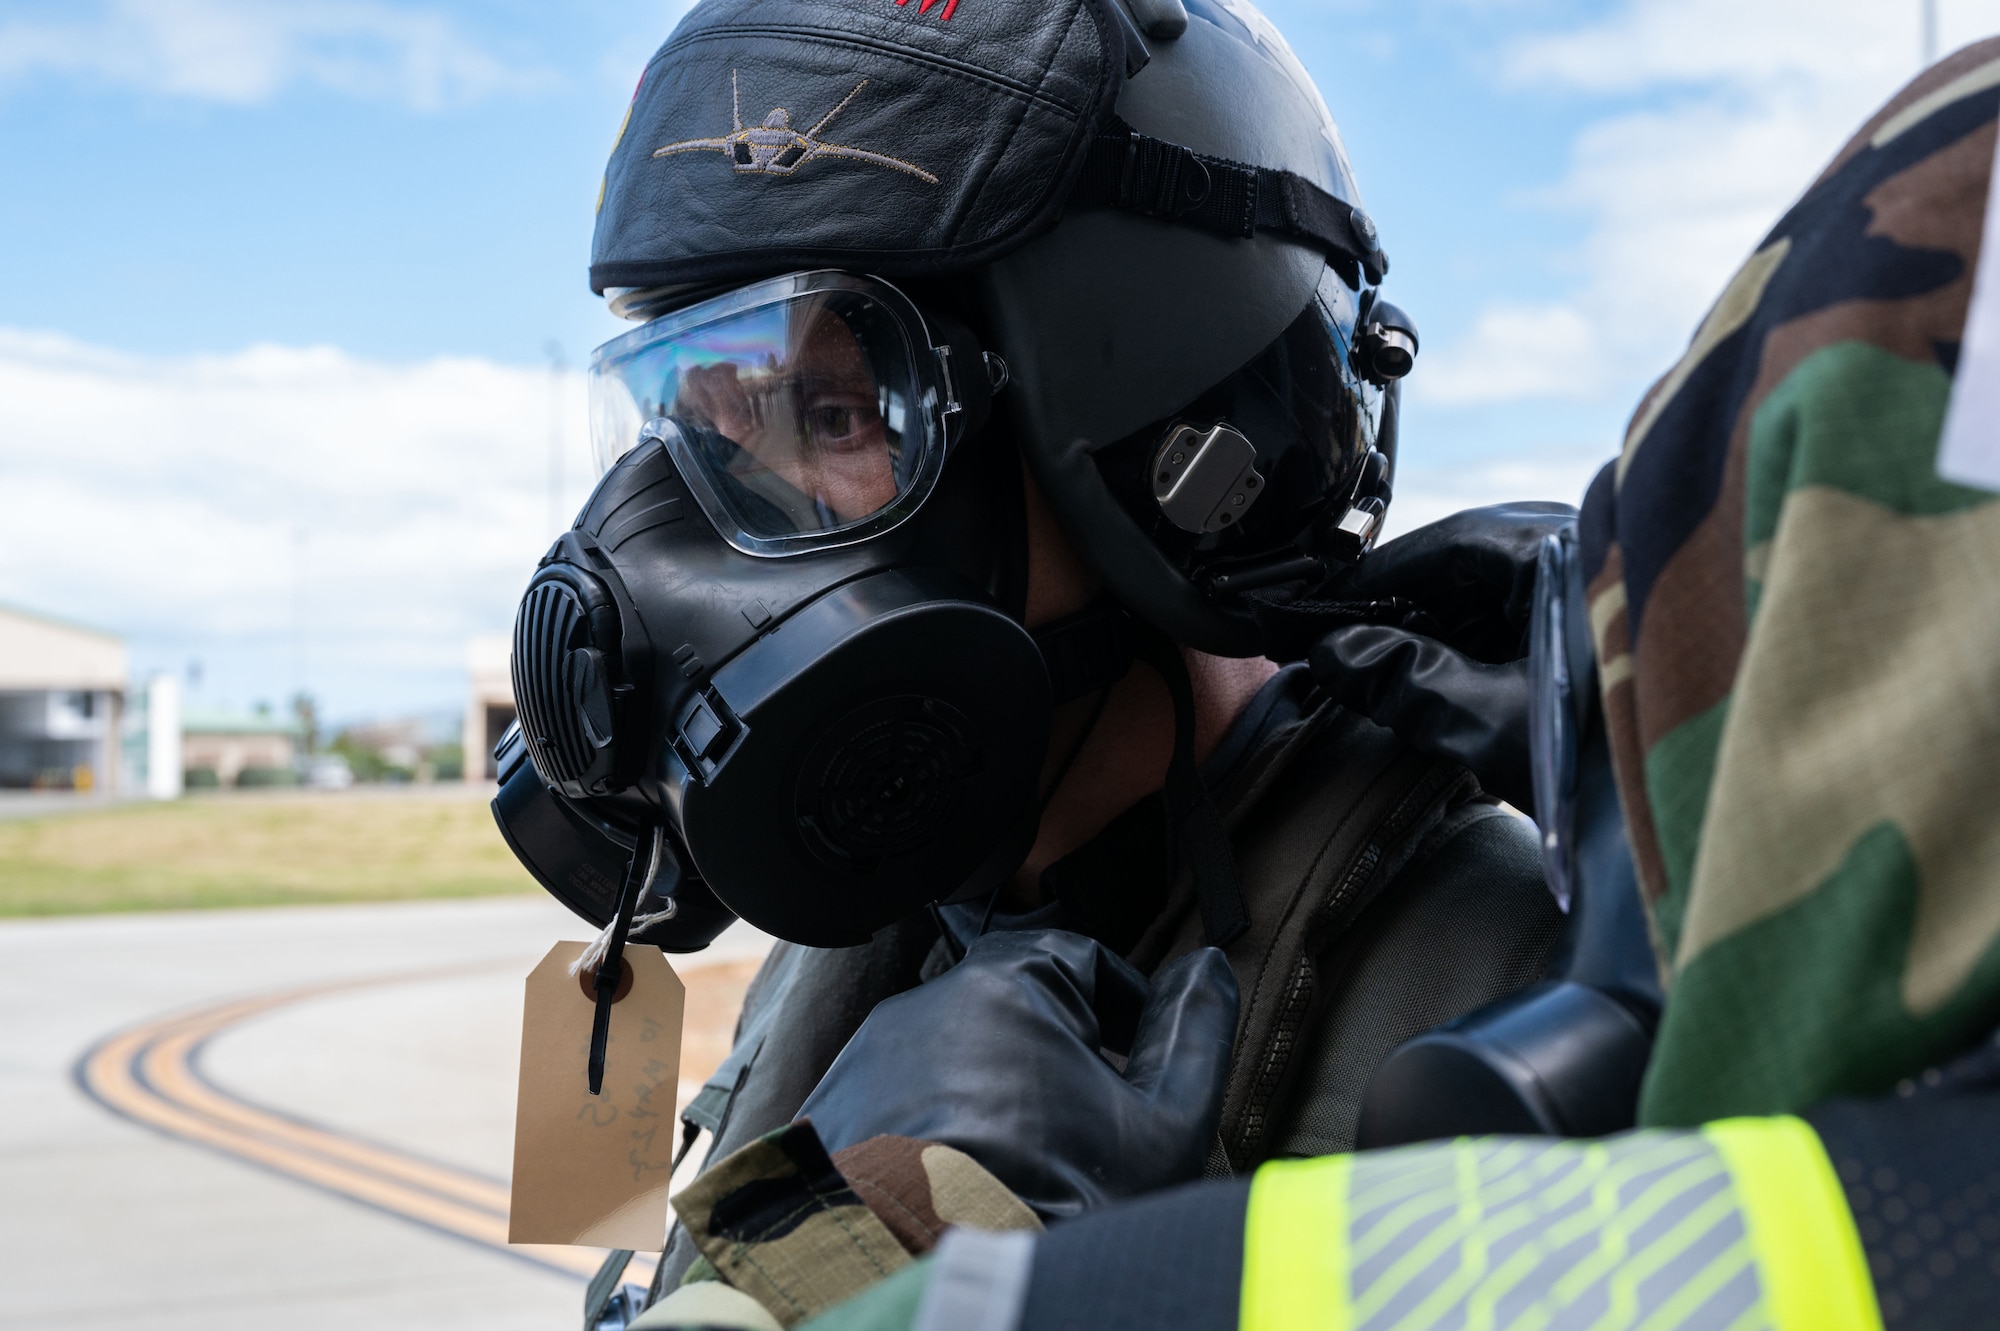 U.S. Air Force Capt. Alex “Doom” Moss, 19th Fighter Squadron F-22 Raptor pilot, utilizes the aircrew ensemble respiratory protection system while processing through the aircrew contamination control area during the Next Generation Aircrew Protection Step- Launch and Recover training event, Joint Base Pearl Harbor-Hickam, Hawaii, May 10, 2023. The events at Hickam were capped off with the opportunity to showcase the successful efforts of all involved to the Commander of Pacific Air Forces, highlighting to him how these practical risk-based decisions are allowing his wing commanders to Fight Tonight. (U.S. Air Force photo by Tech. Sgt. Hailey Haux)